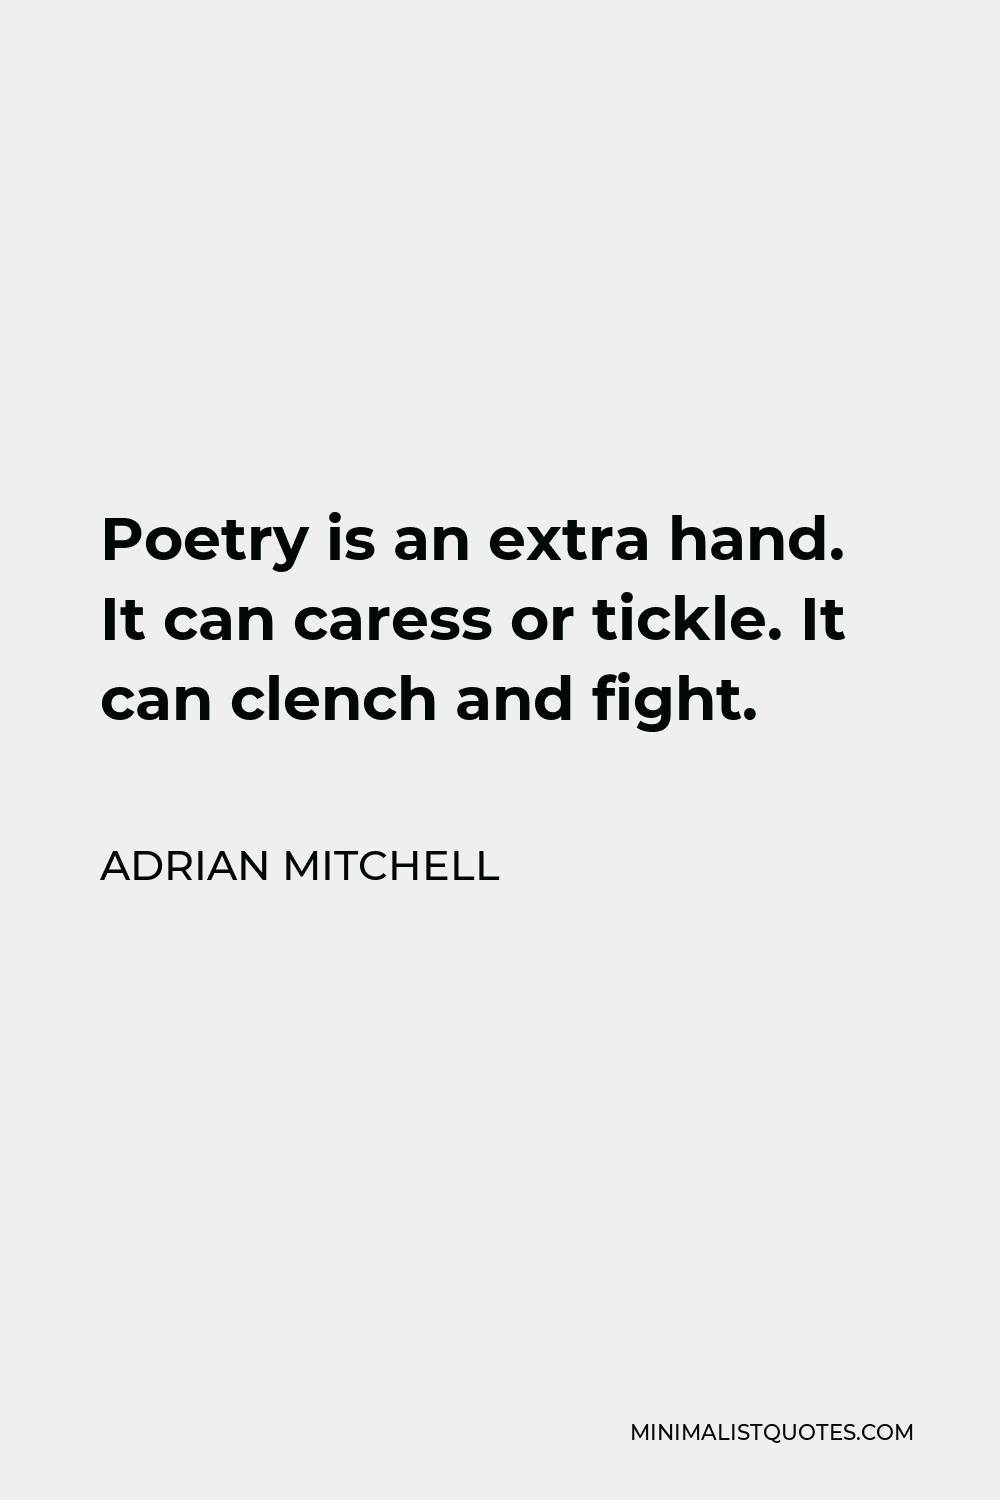 Adrian Mitchell Quote - Poetry is an extra hand. It can caress or tickle. It can clench and fight.